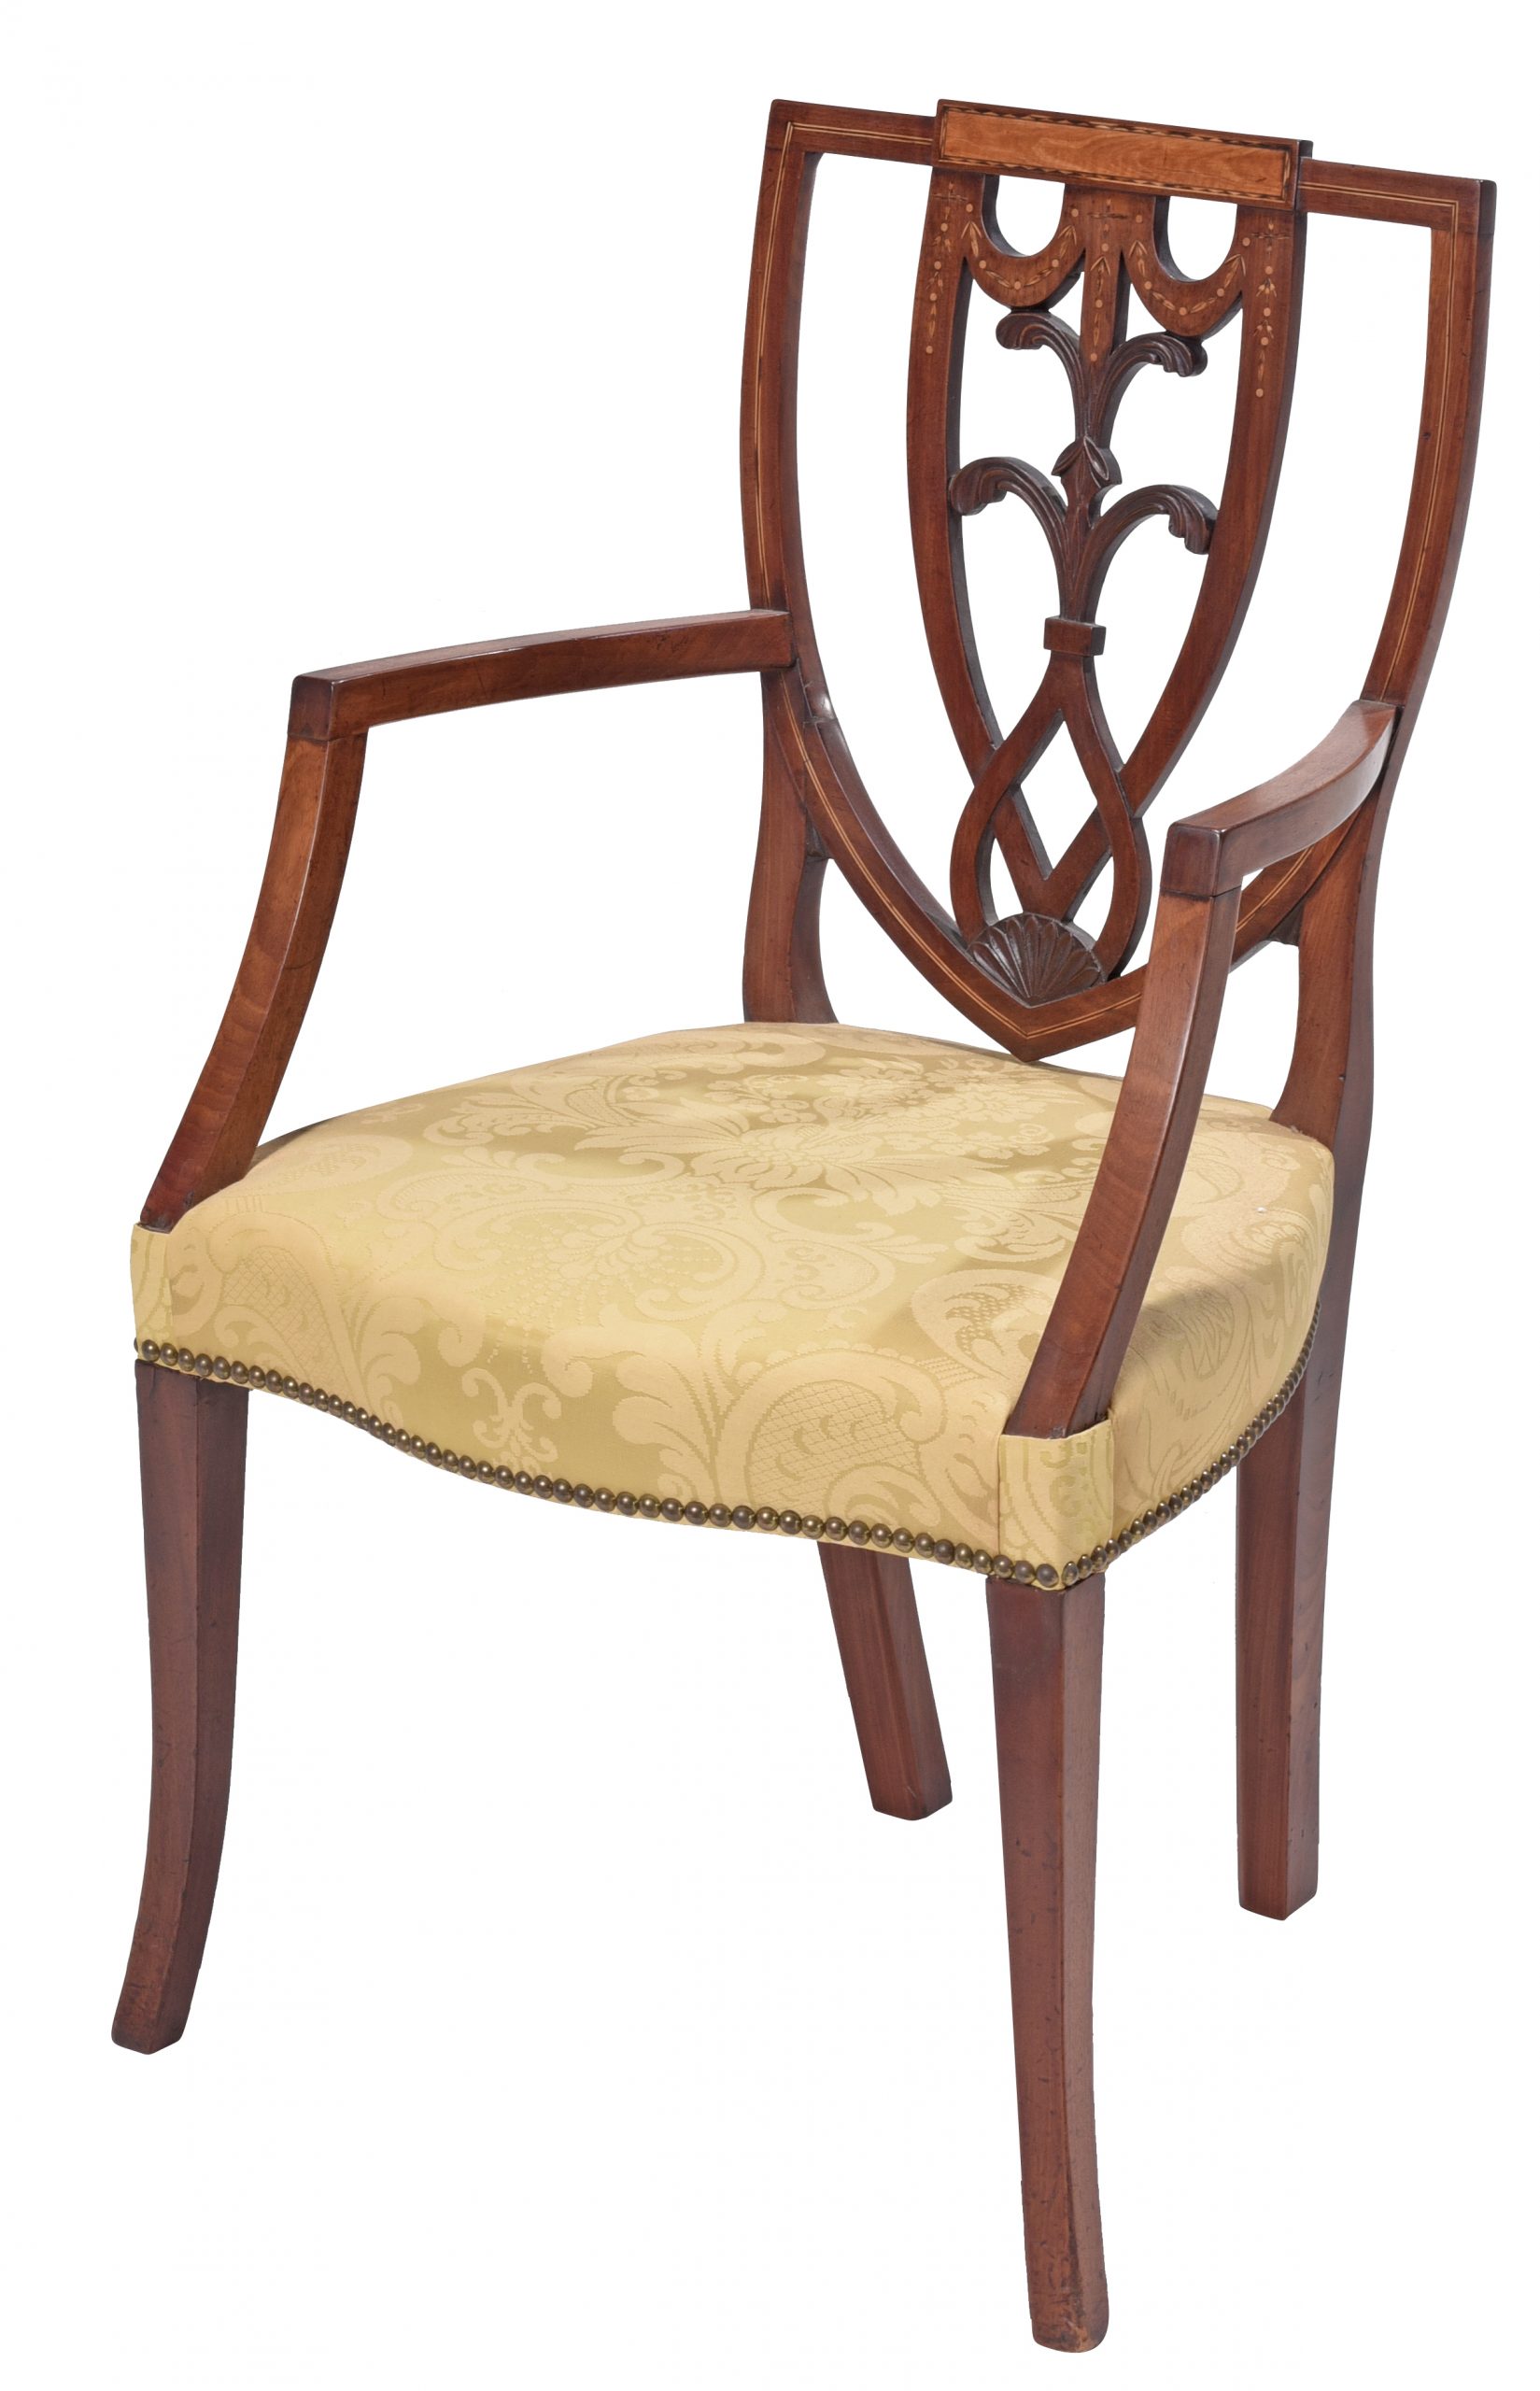 Lot 588 | Fine and Rare Federal Mahogany and Satinwood Carved Inlaid Armchair<br />
Estimate: $4,000 - $6,000